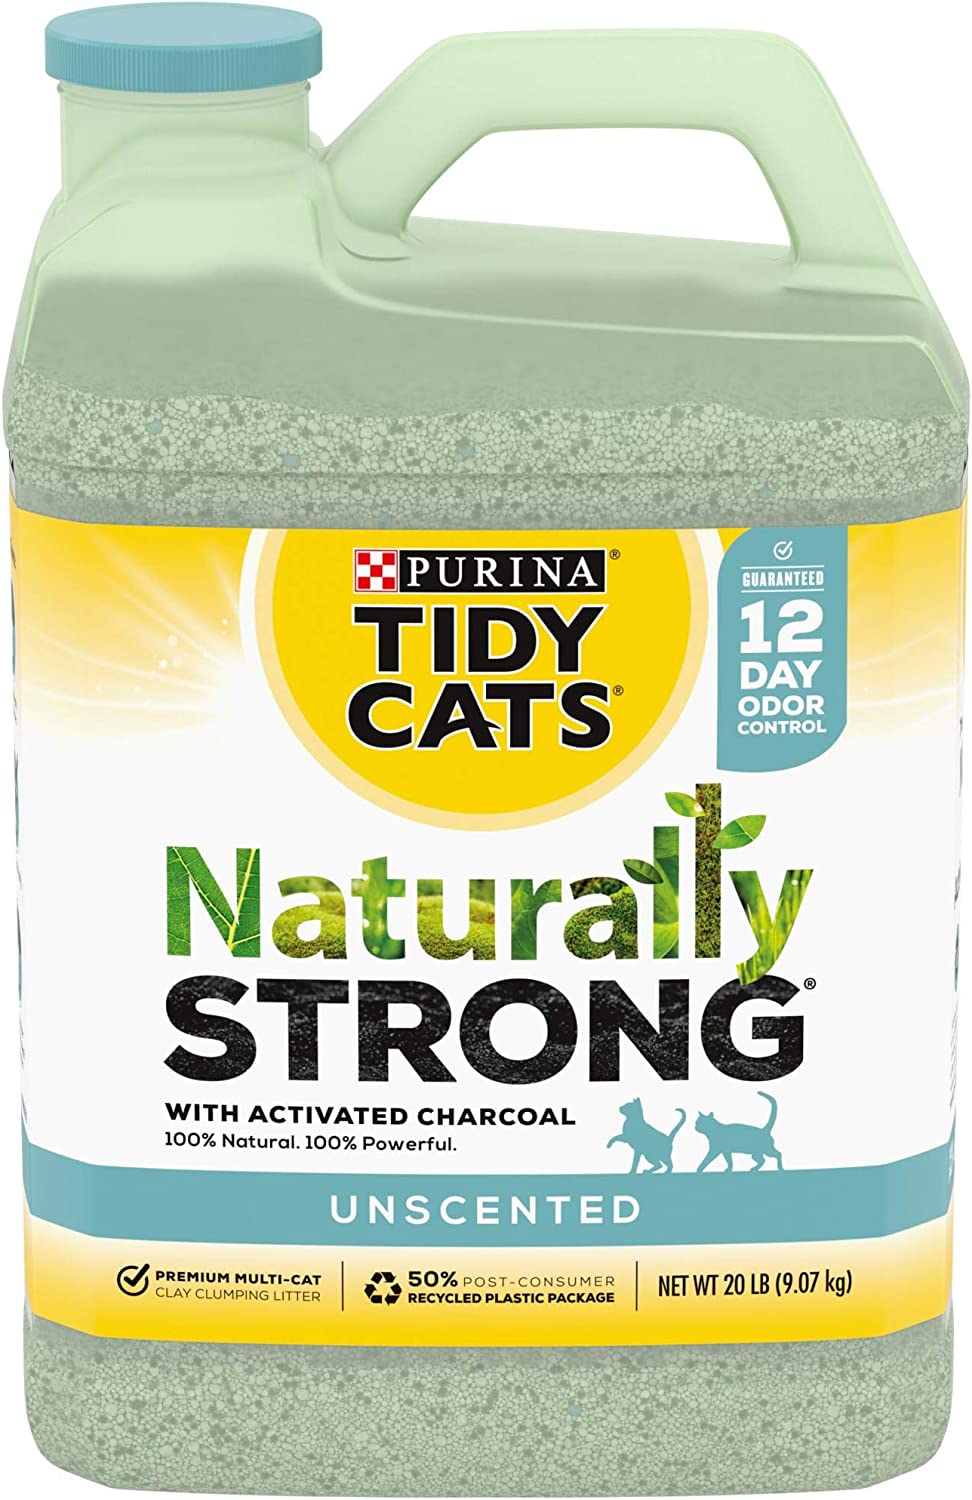 Purina Tidy Cats Unscented